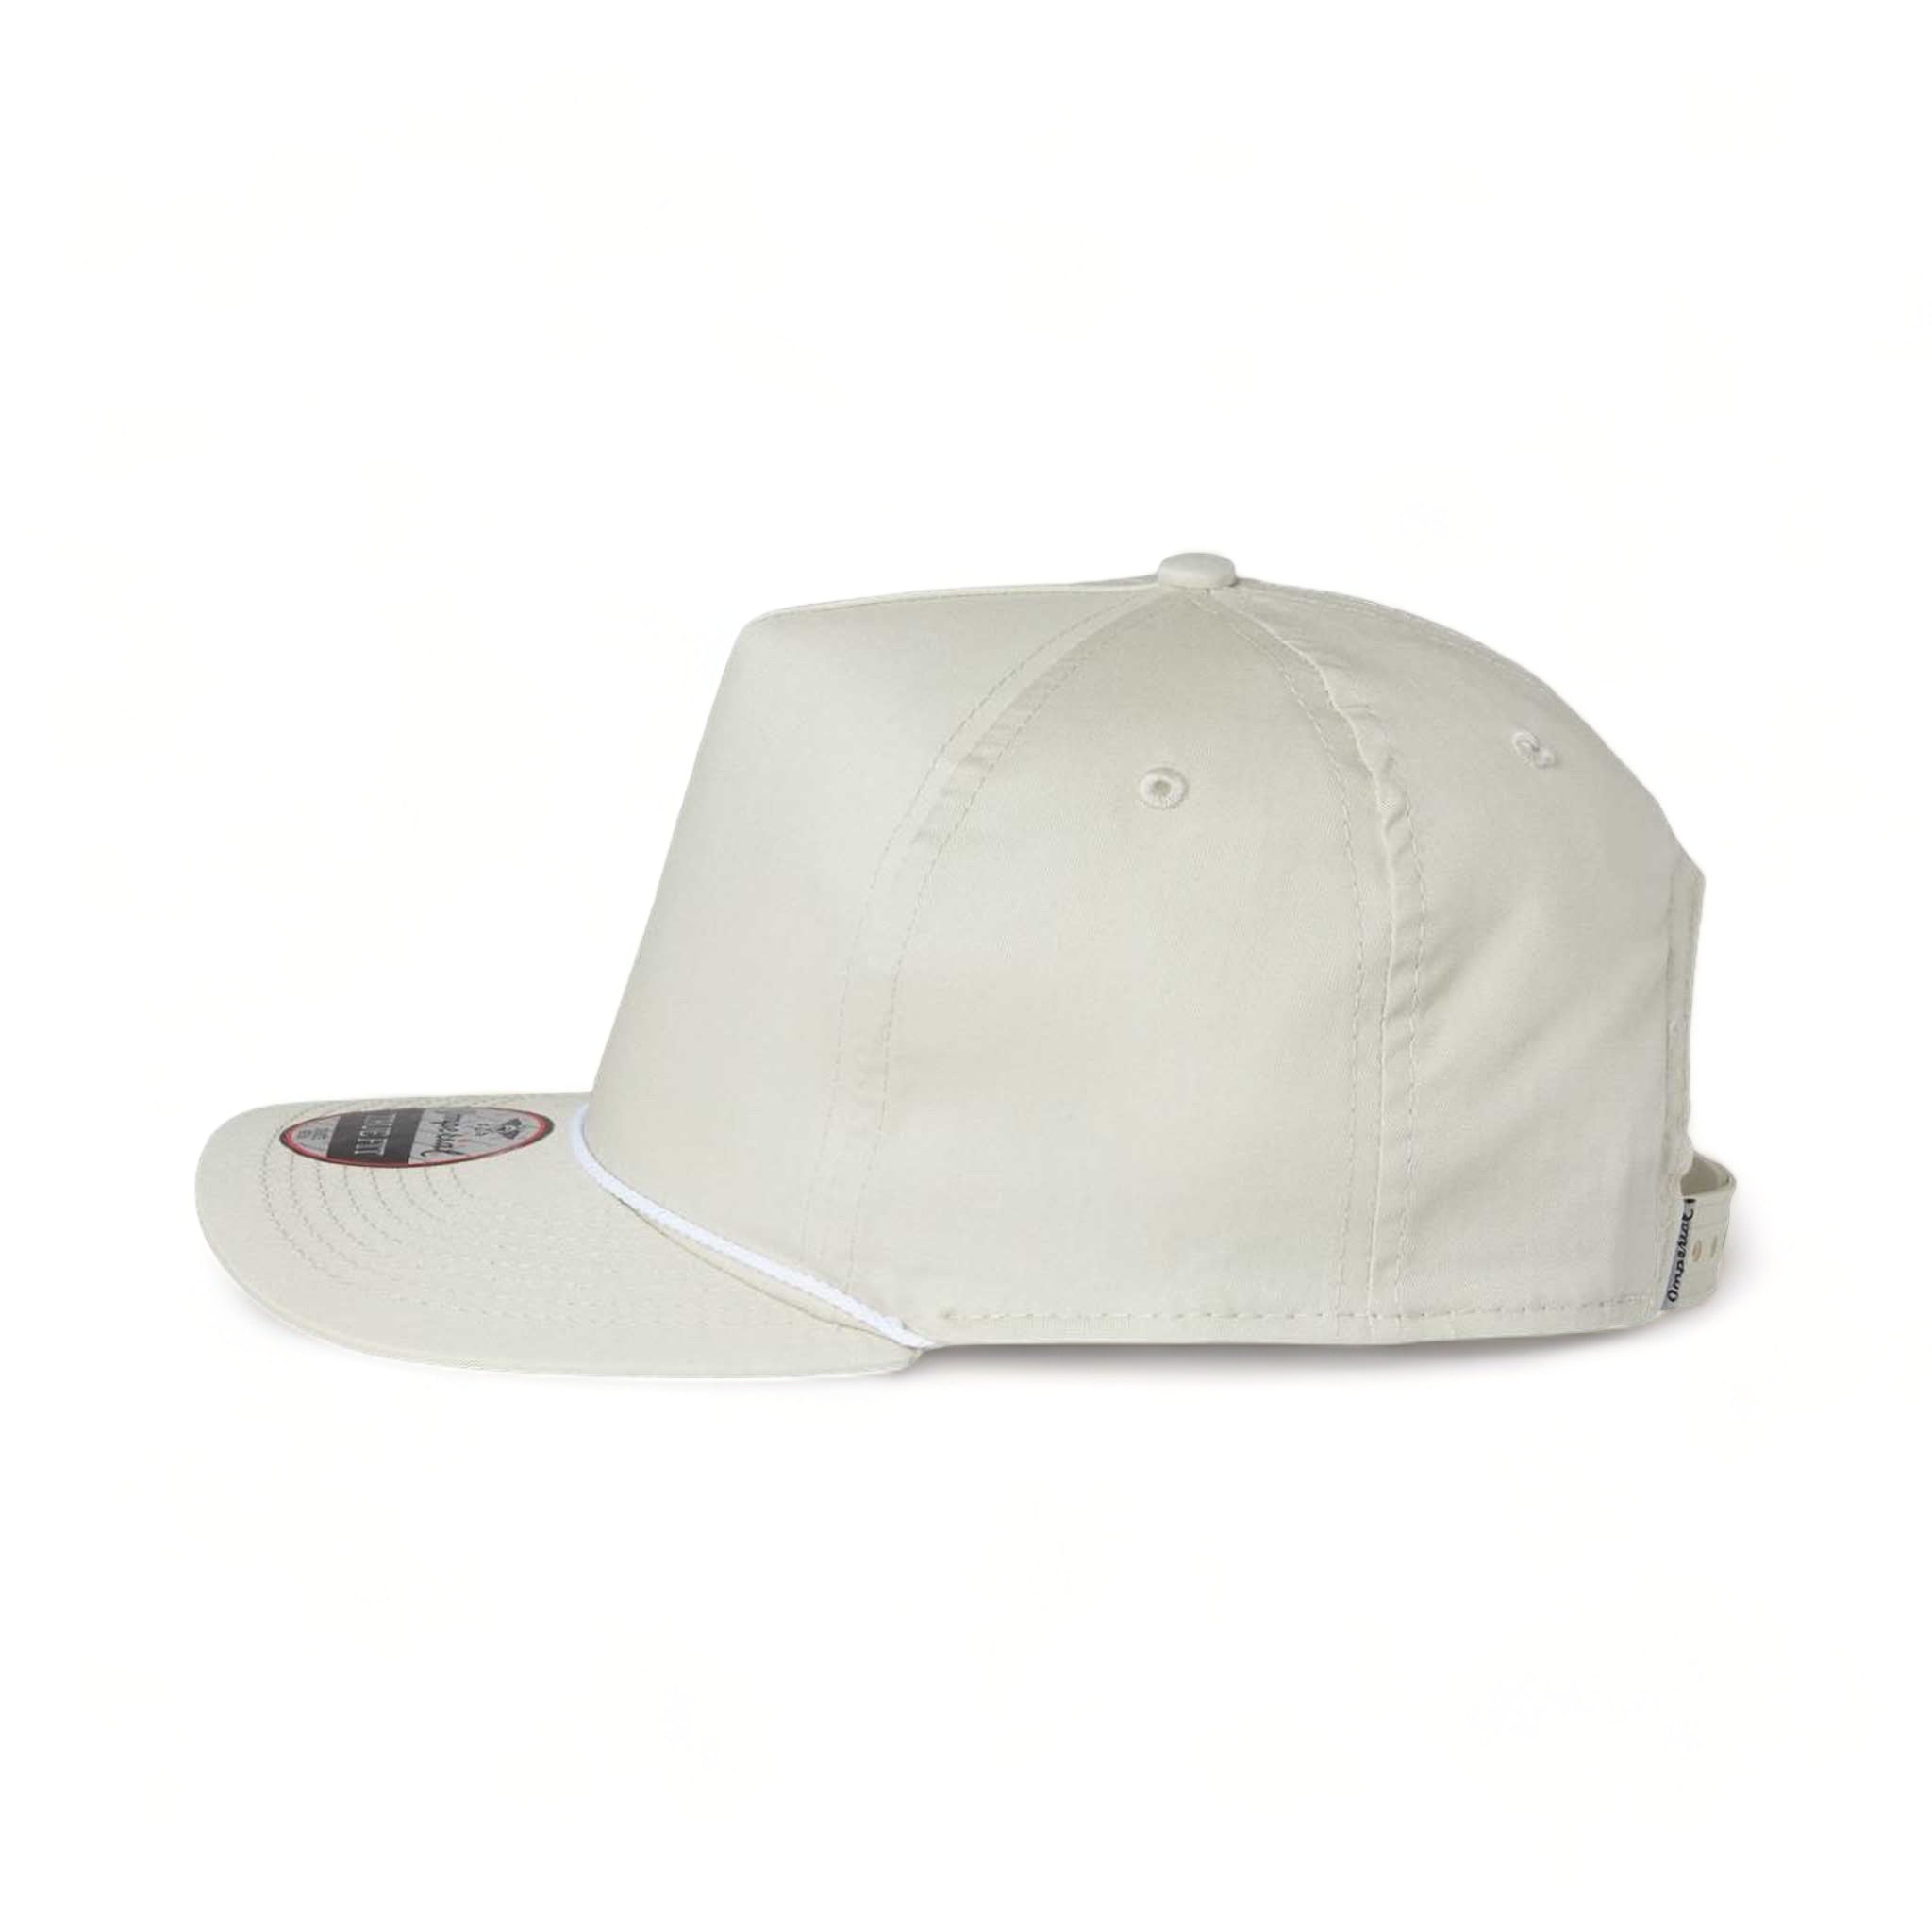 Side view of Imperial 5056 custom hat in putty and white